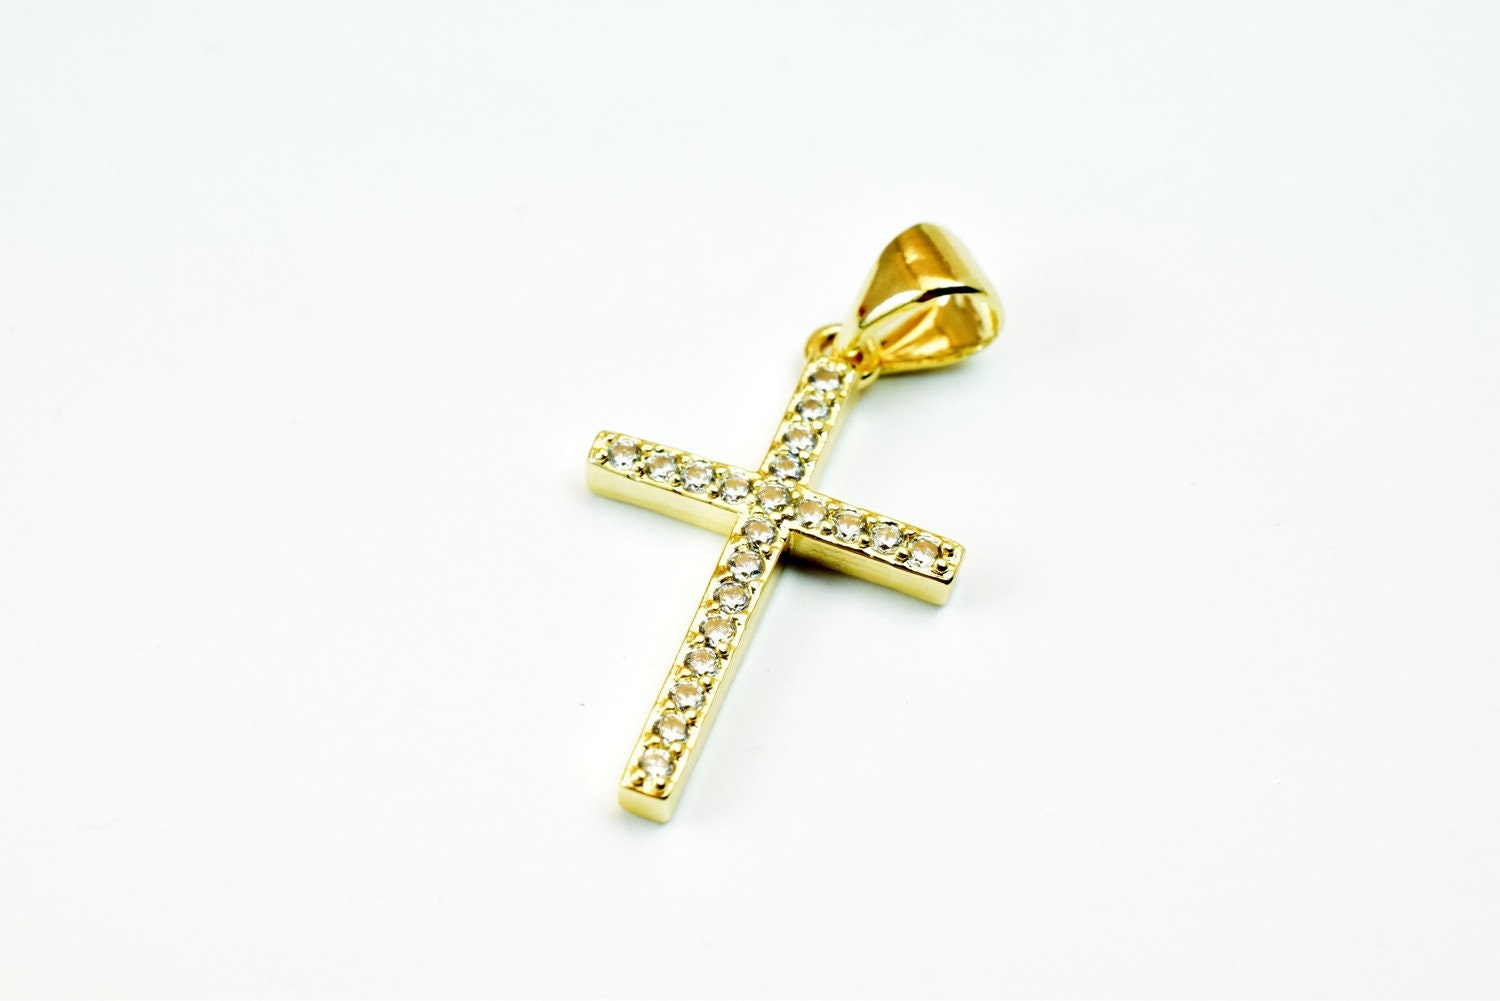 Cross Rhinestone Charm Pendant 14K as Gold Filled* Size 21x13.5mm Micro Pave Beads Charm with Clear CZ Cubic Zirconia GFM26A